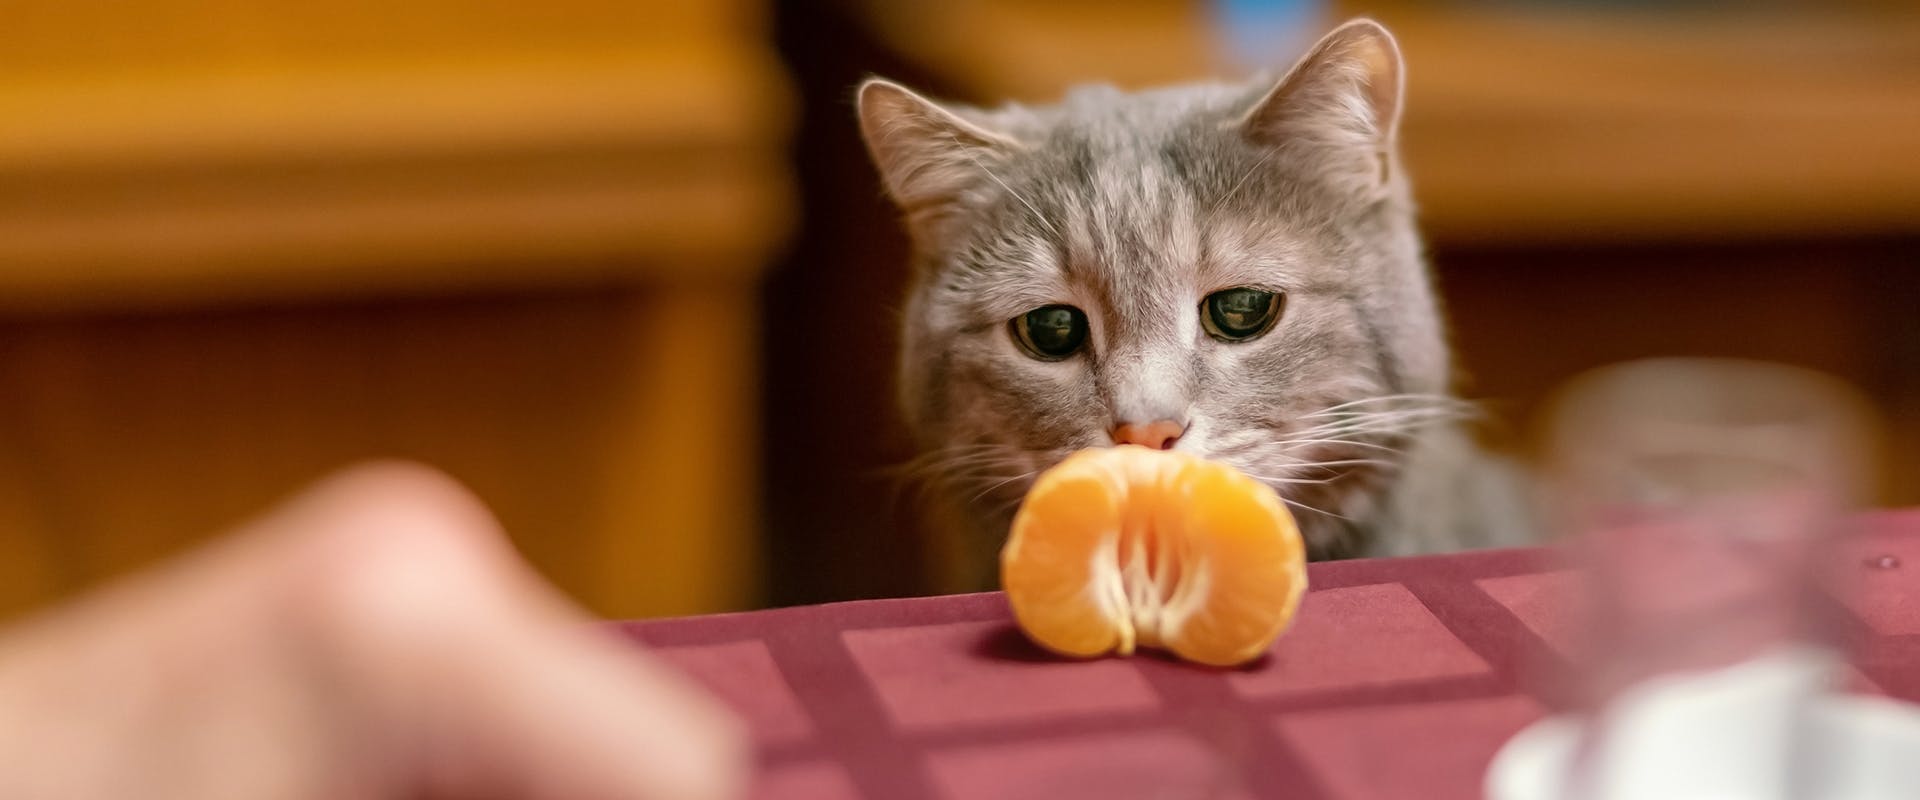 A cat looking down, staring at a peeled orange